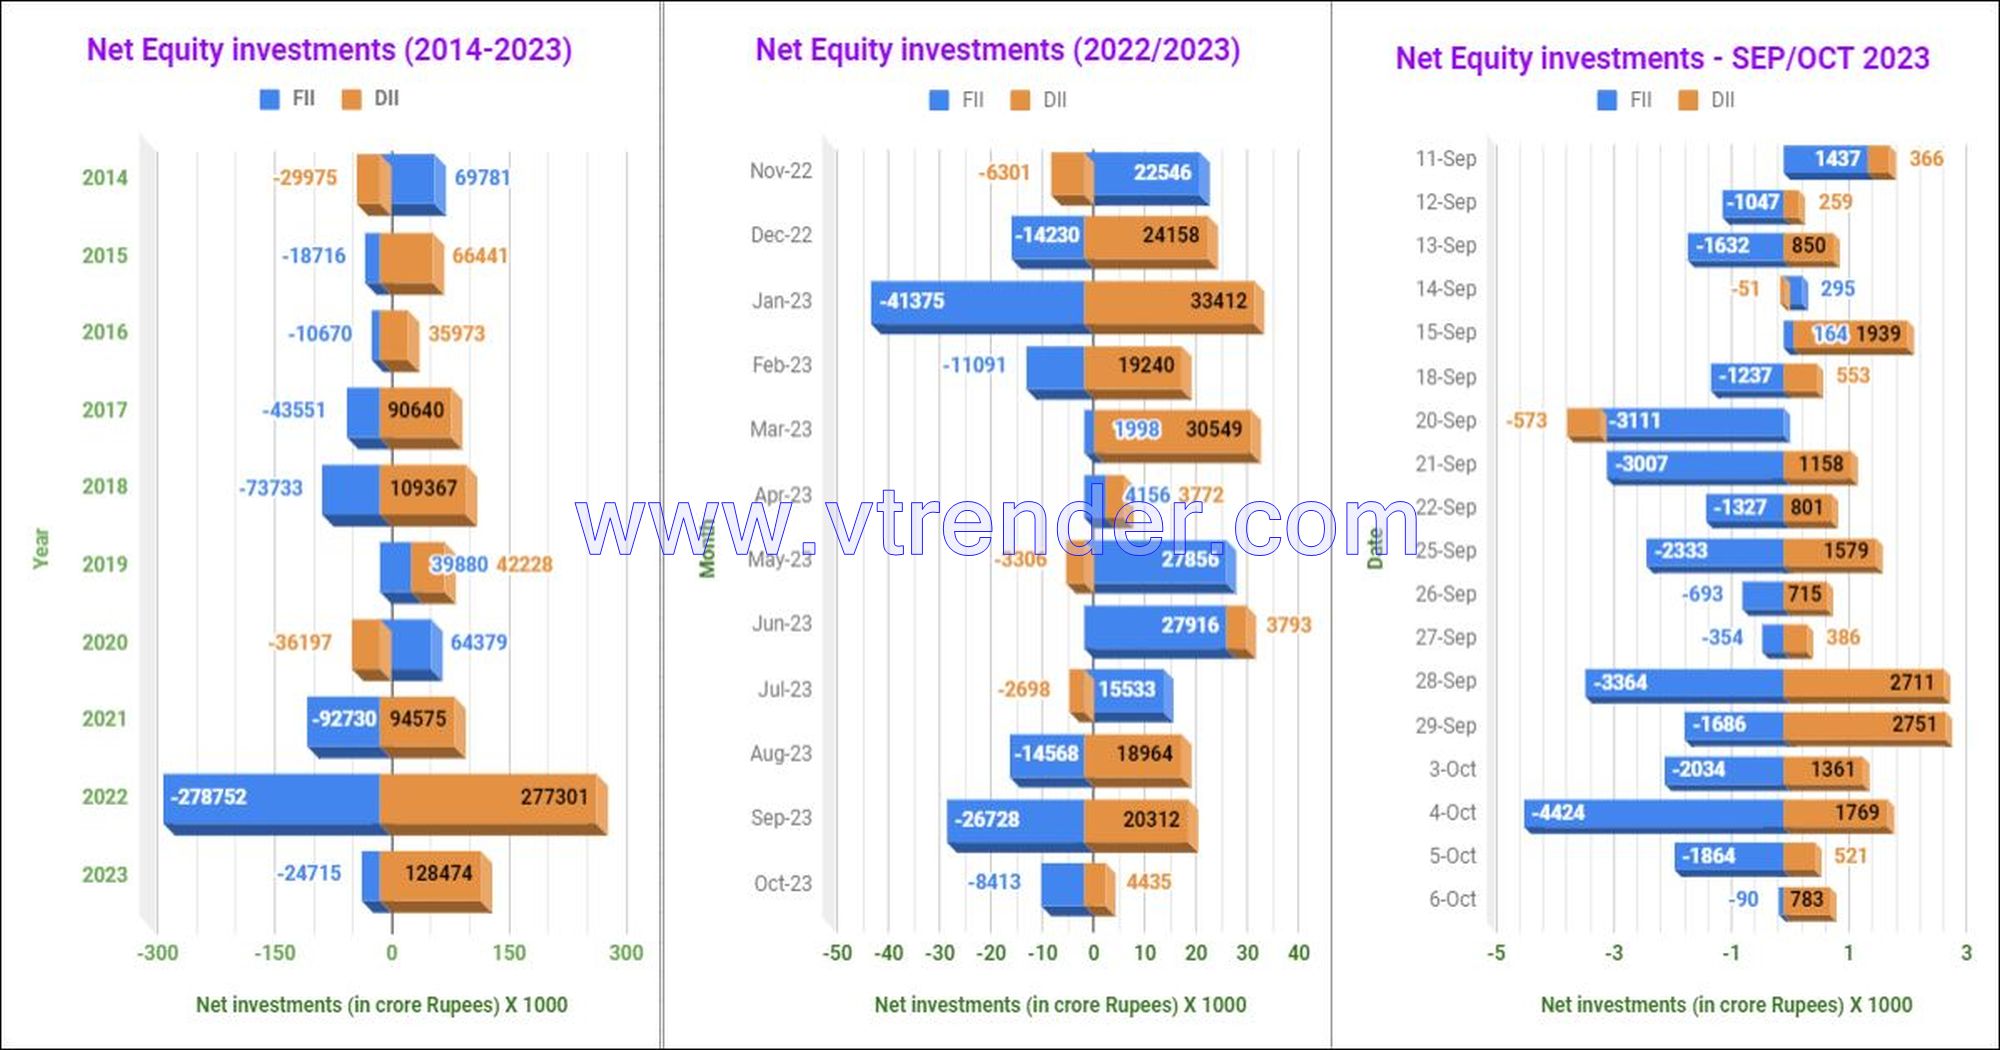 Netequity06Oct Participantwise Net Open Interest And Net Equity Investments – 6Th Oct 2023 Ce, Client, Dii, Fii, Index Futures, Index Options, Open Interest, Pe, Prop, Stocks Futures